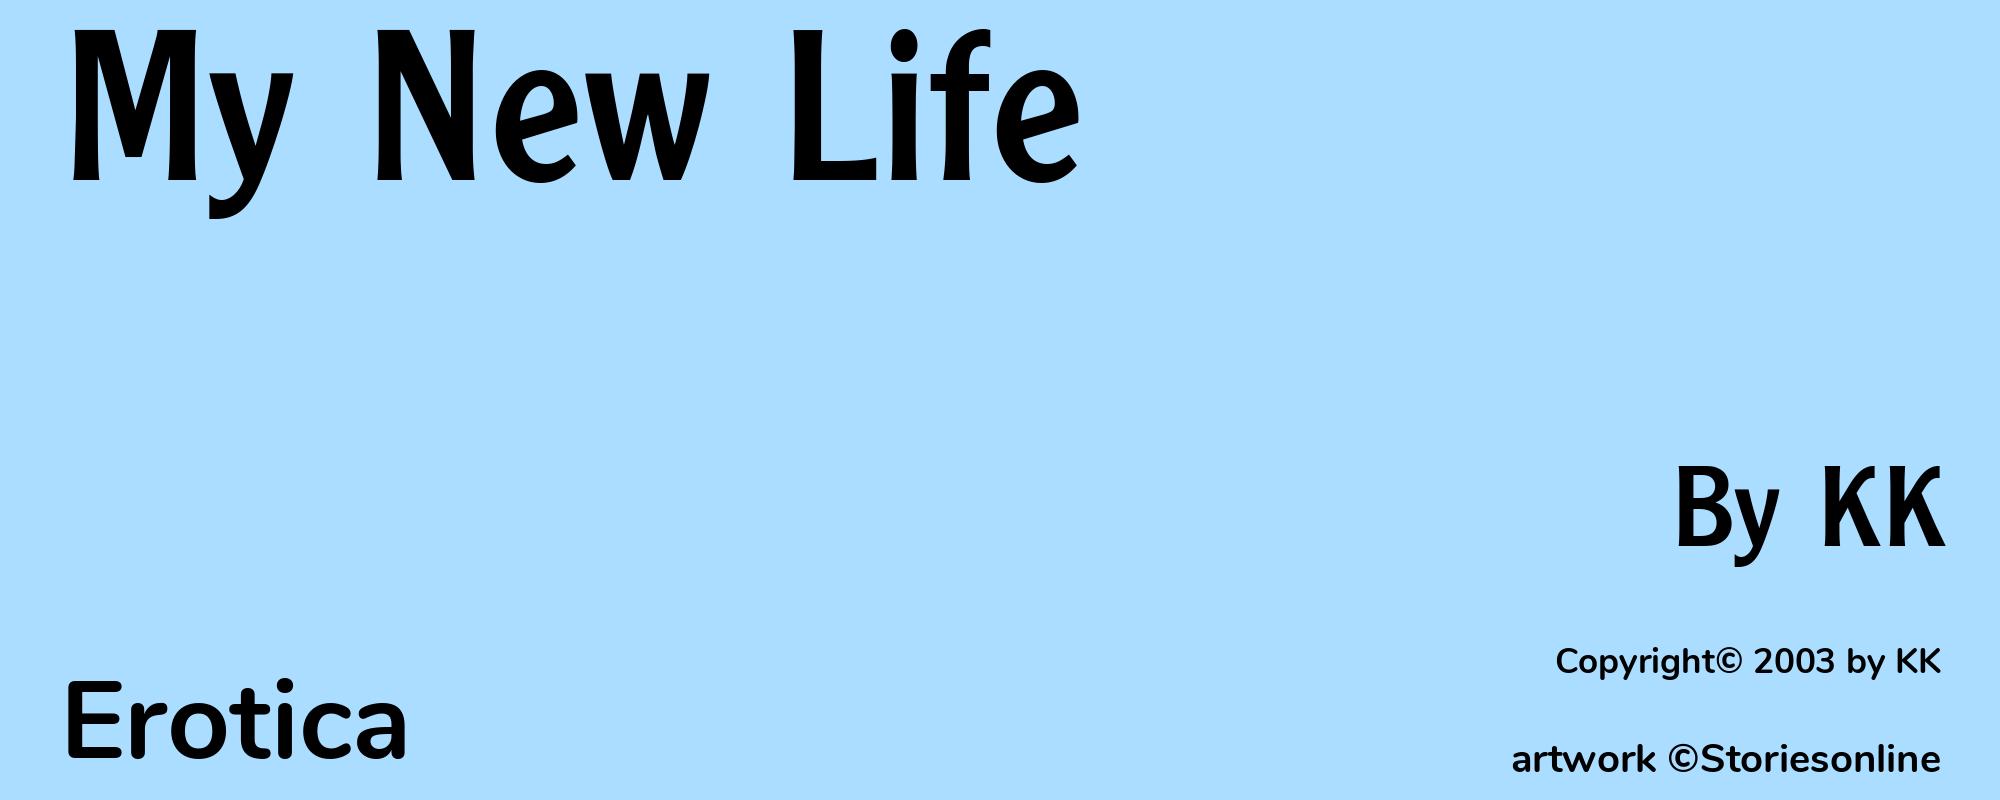 My New Life - Cover